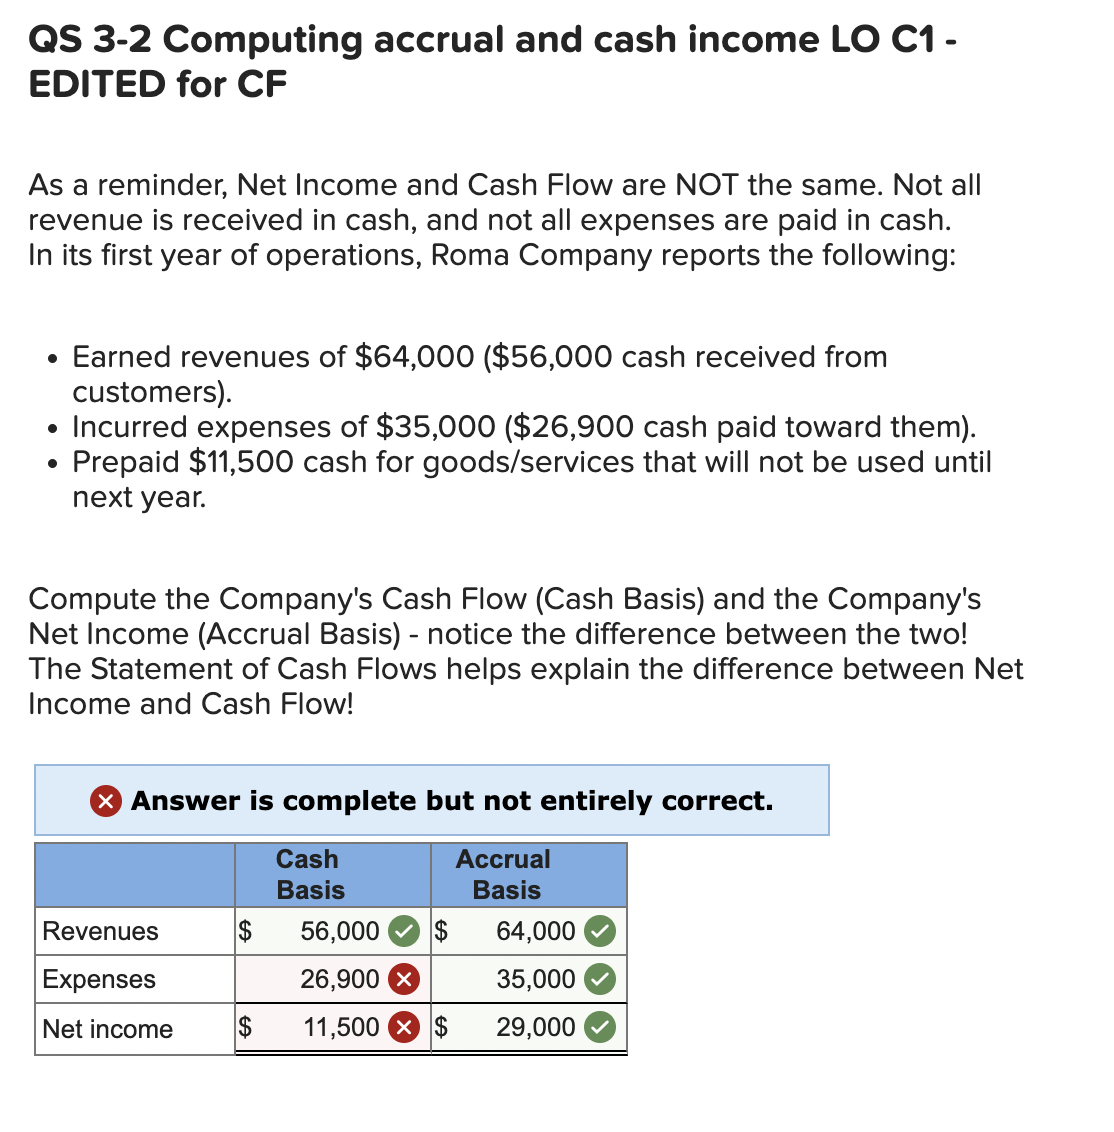 QS 3-2 Computing accrual and cash income LO C1 -
EDITED for CF
As a reminder, Net Income and Cash Flow are NOT the same. Not all
revenue is received in cash, and not all expenses are paid in cash.
In its first year of operations, Roma Company reports the following:
• Earned revenues of $64,000 ($56,000 cash received from
customers).
• Incurred expenses of $35,000 ($26,900 cash paid toward them).
Prepaid $11,500 cash for goods/services that will not be used until
next year.
Compute the Company's Cash Flow (Cash Basis) and the Company's
Net Income (Accrual Basis) - notice the difference between the two!
The Statement of Cash Flows helps explain the difference between Net
Income and Cash Flow!
X Answer is complete but not entirely correct.
Accrual
Basis
Revenues
Expenses
Net income
$
$
Cash
Basis
56,000 $
26,900 X
11,500 × $
64,000
35,000
29,000